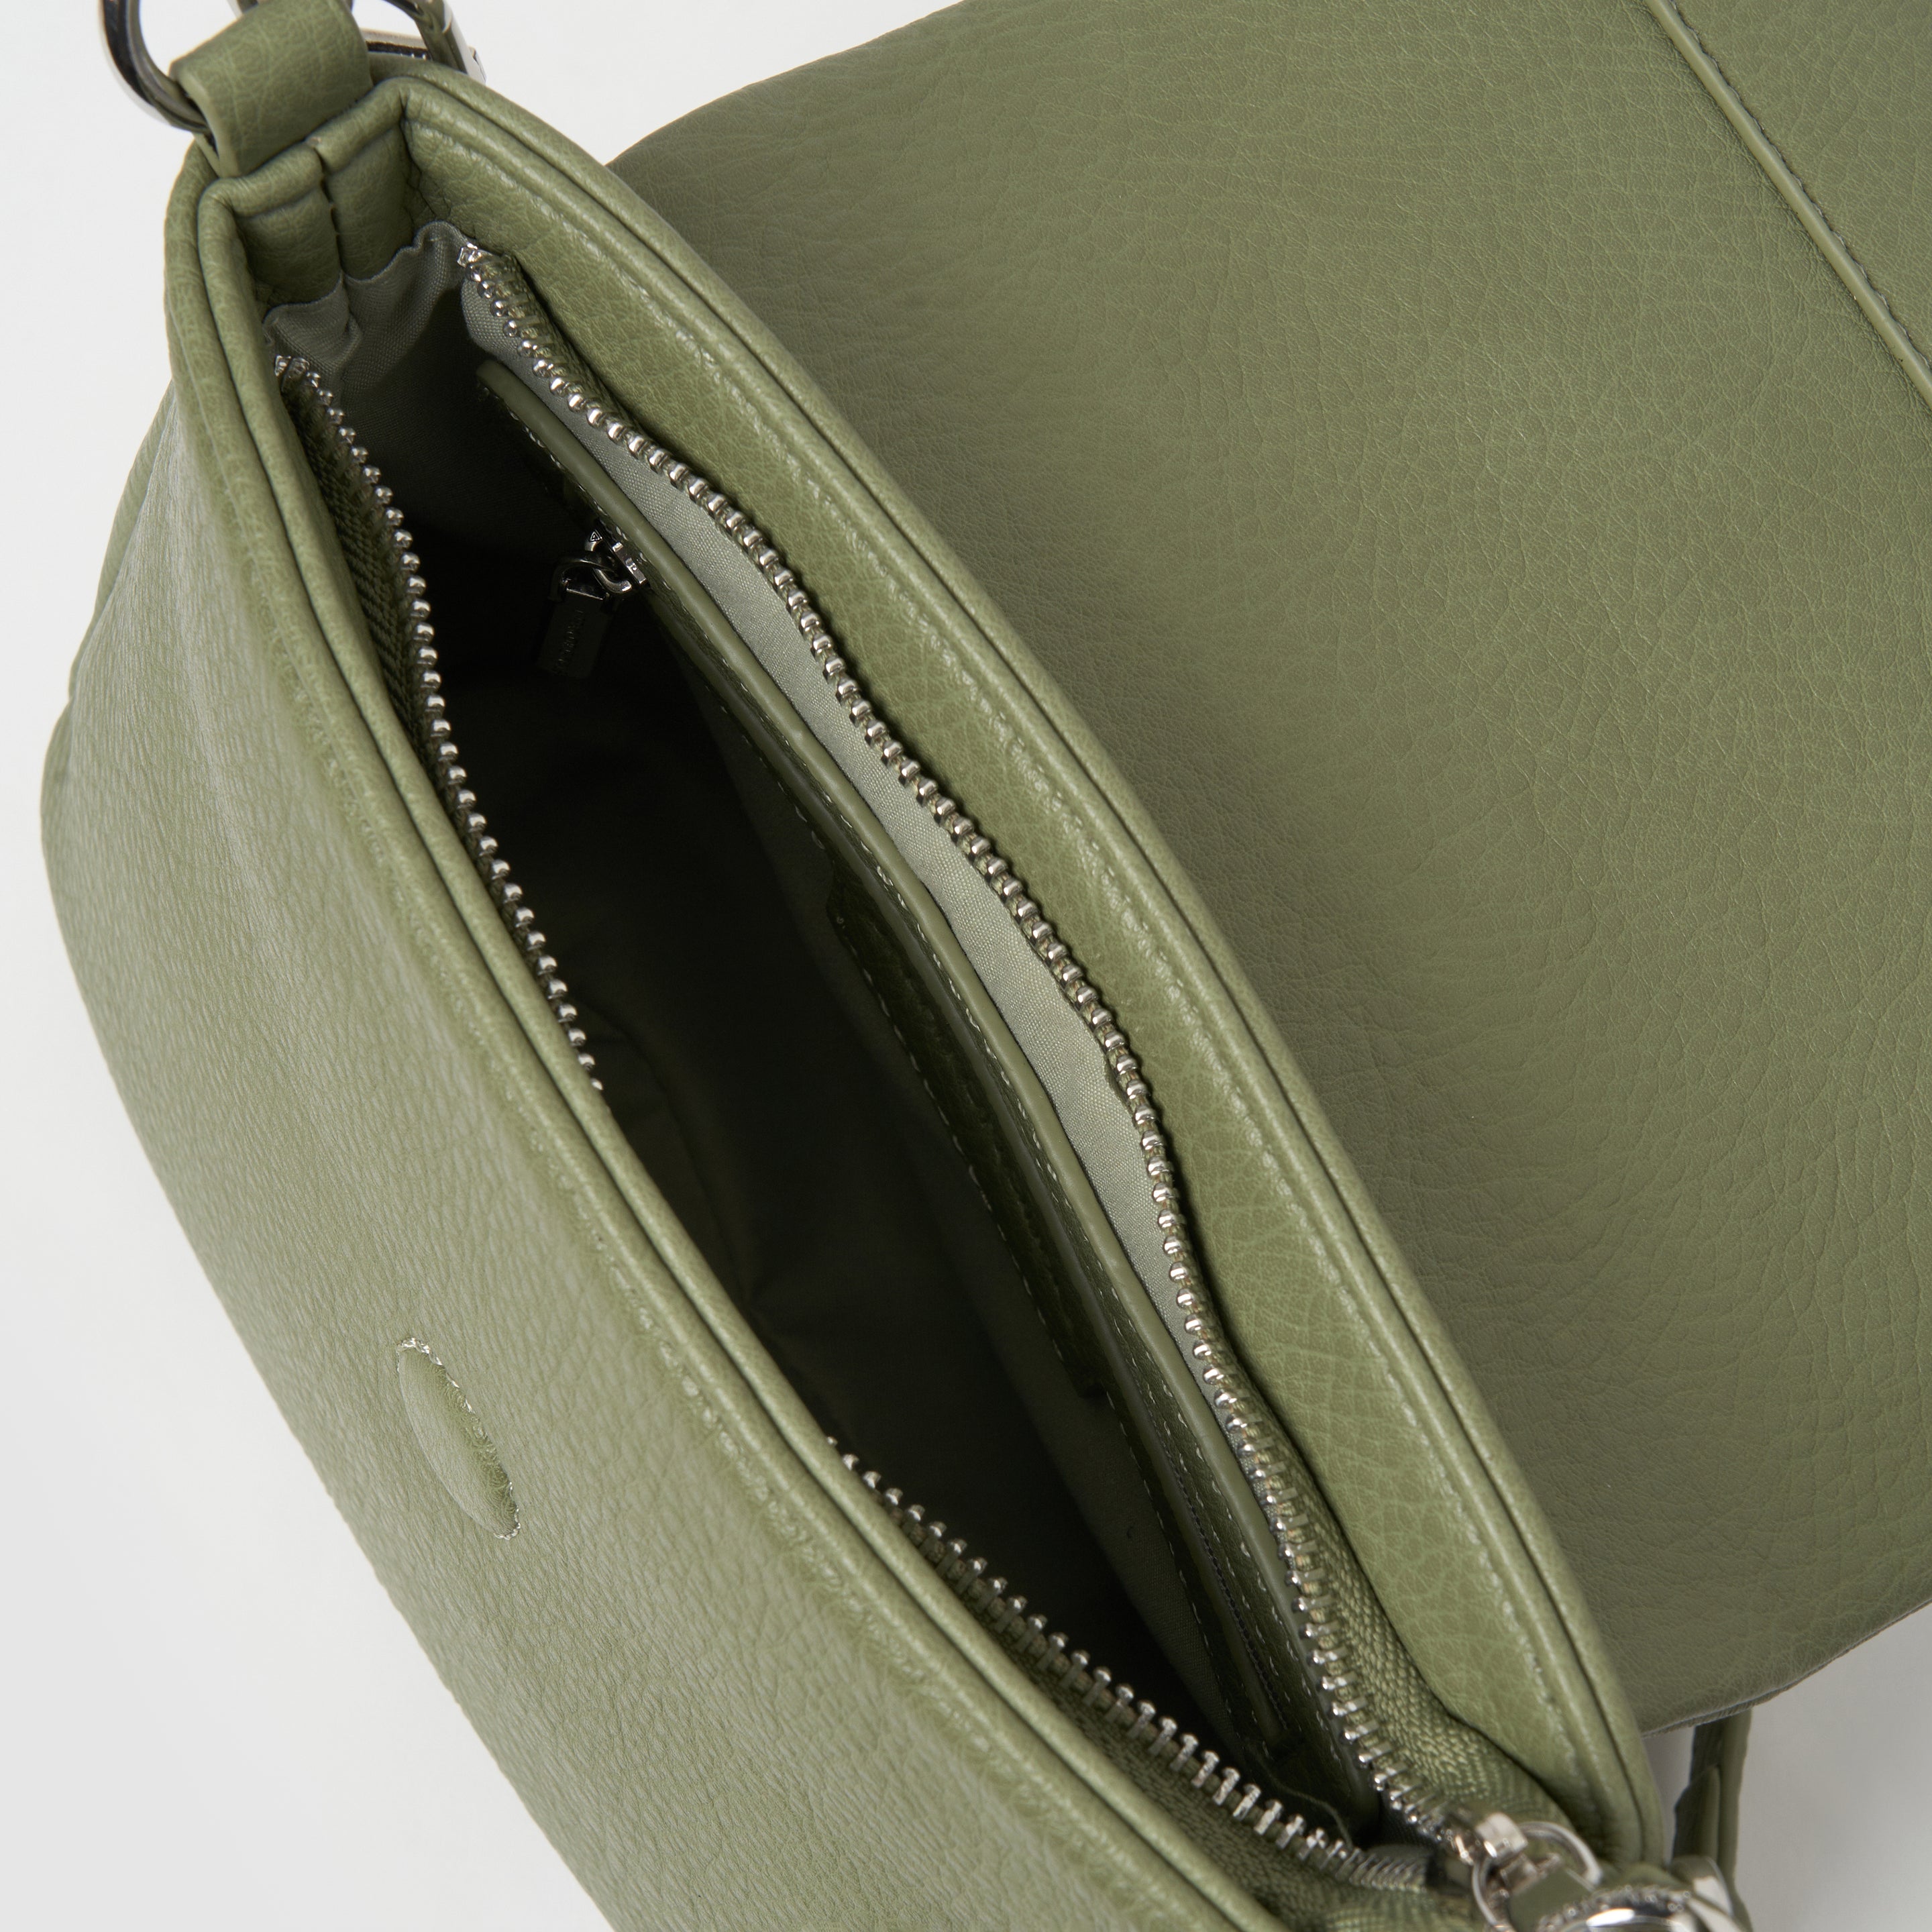 Load image into Gallery viewer, Wish List Crossbody - Green
